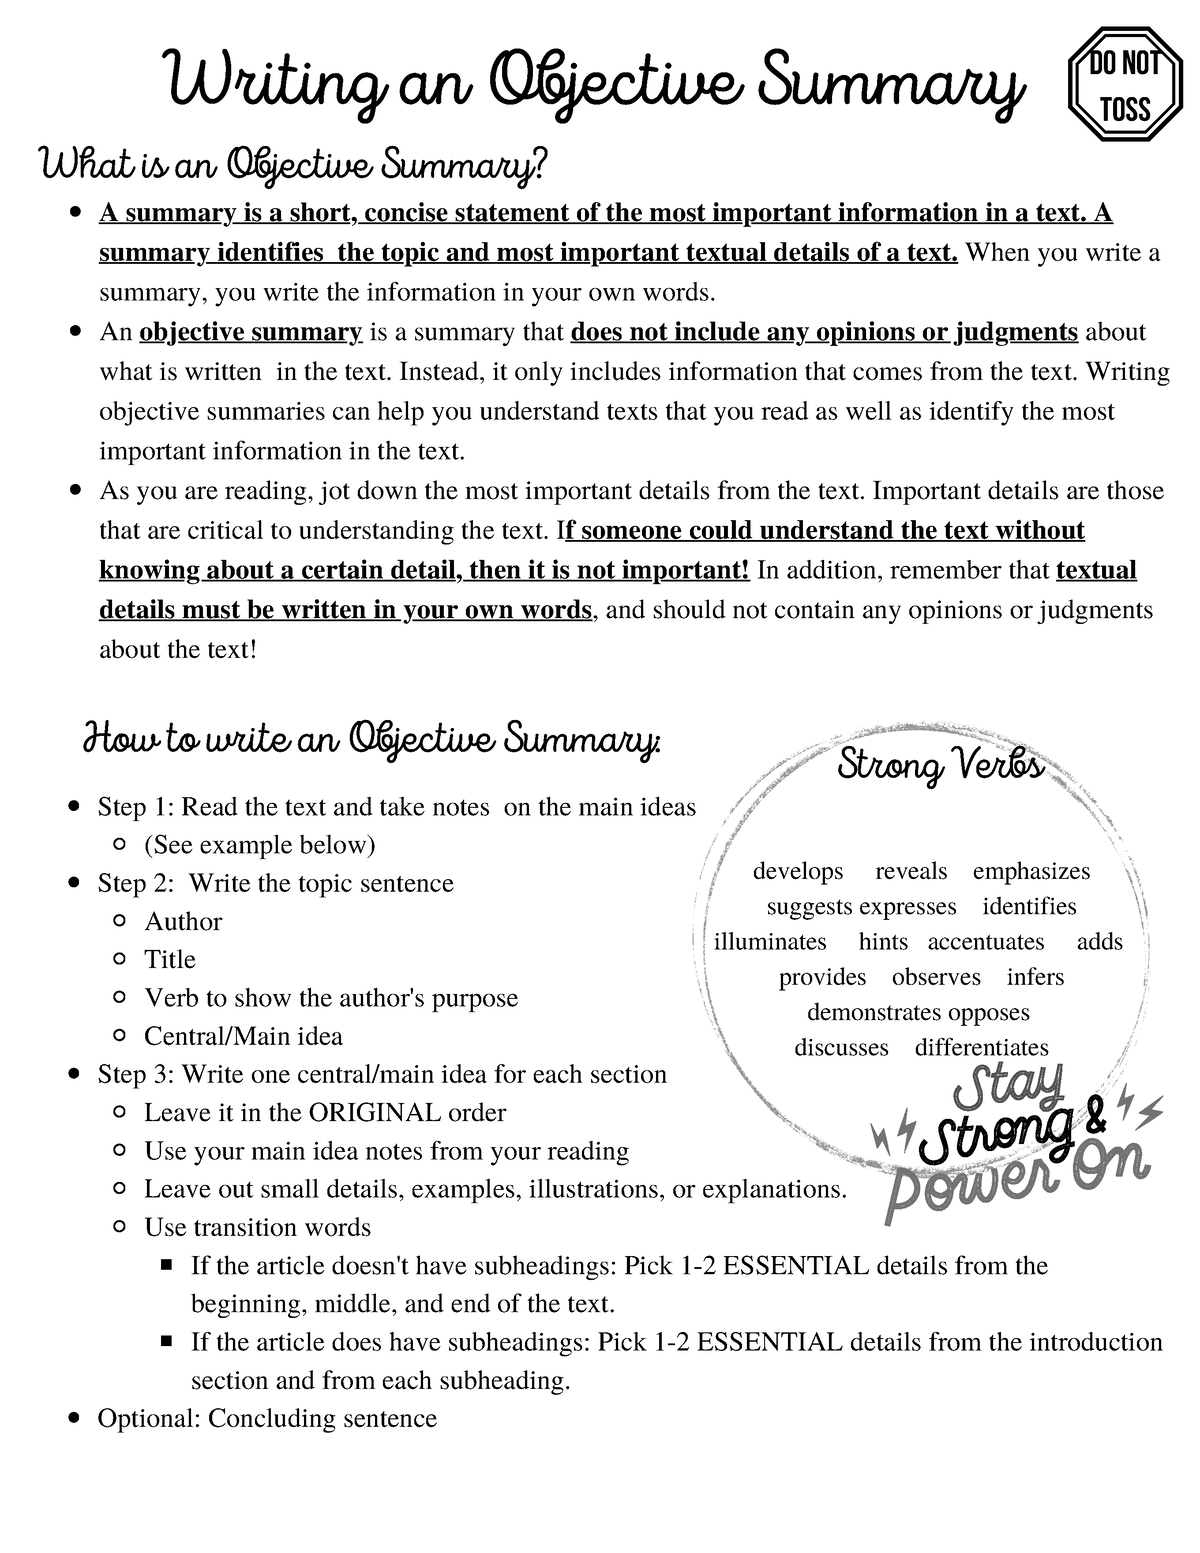 writing-an-objective-summary-handout-step-1-read-the-text-and-take-notes-on-the-main-ideas